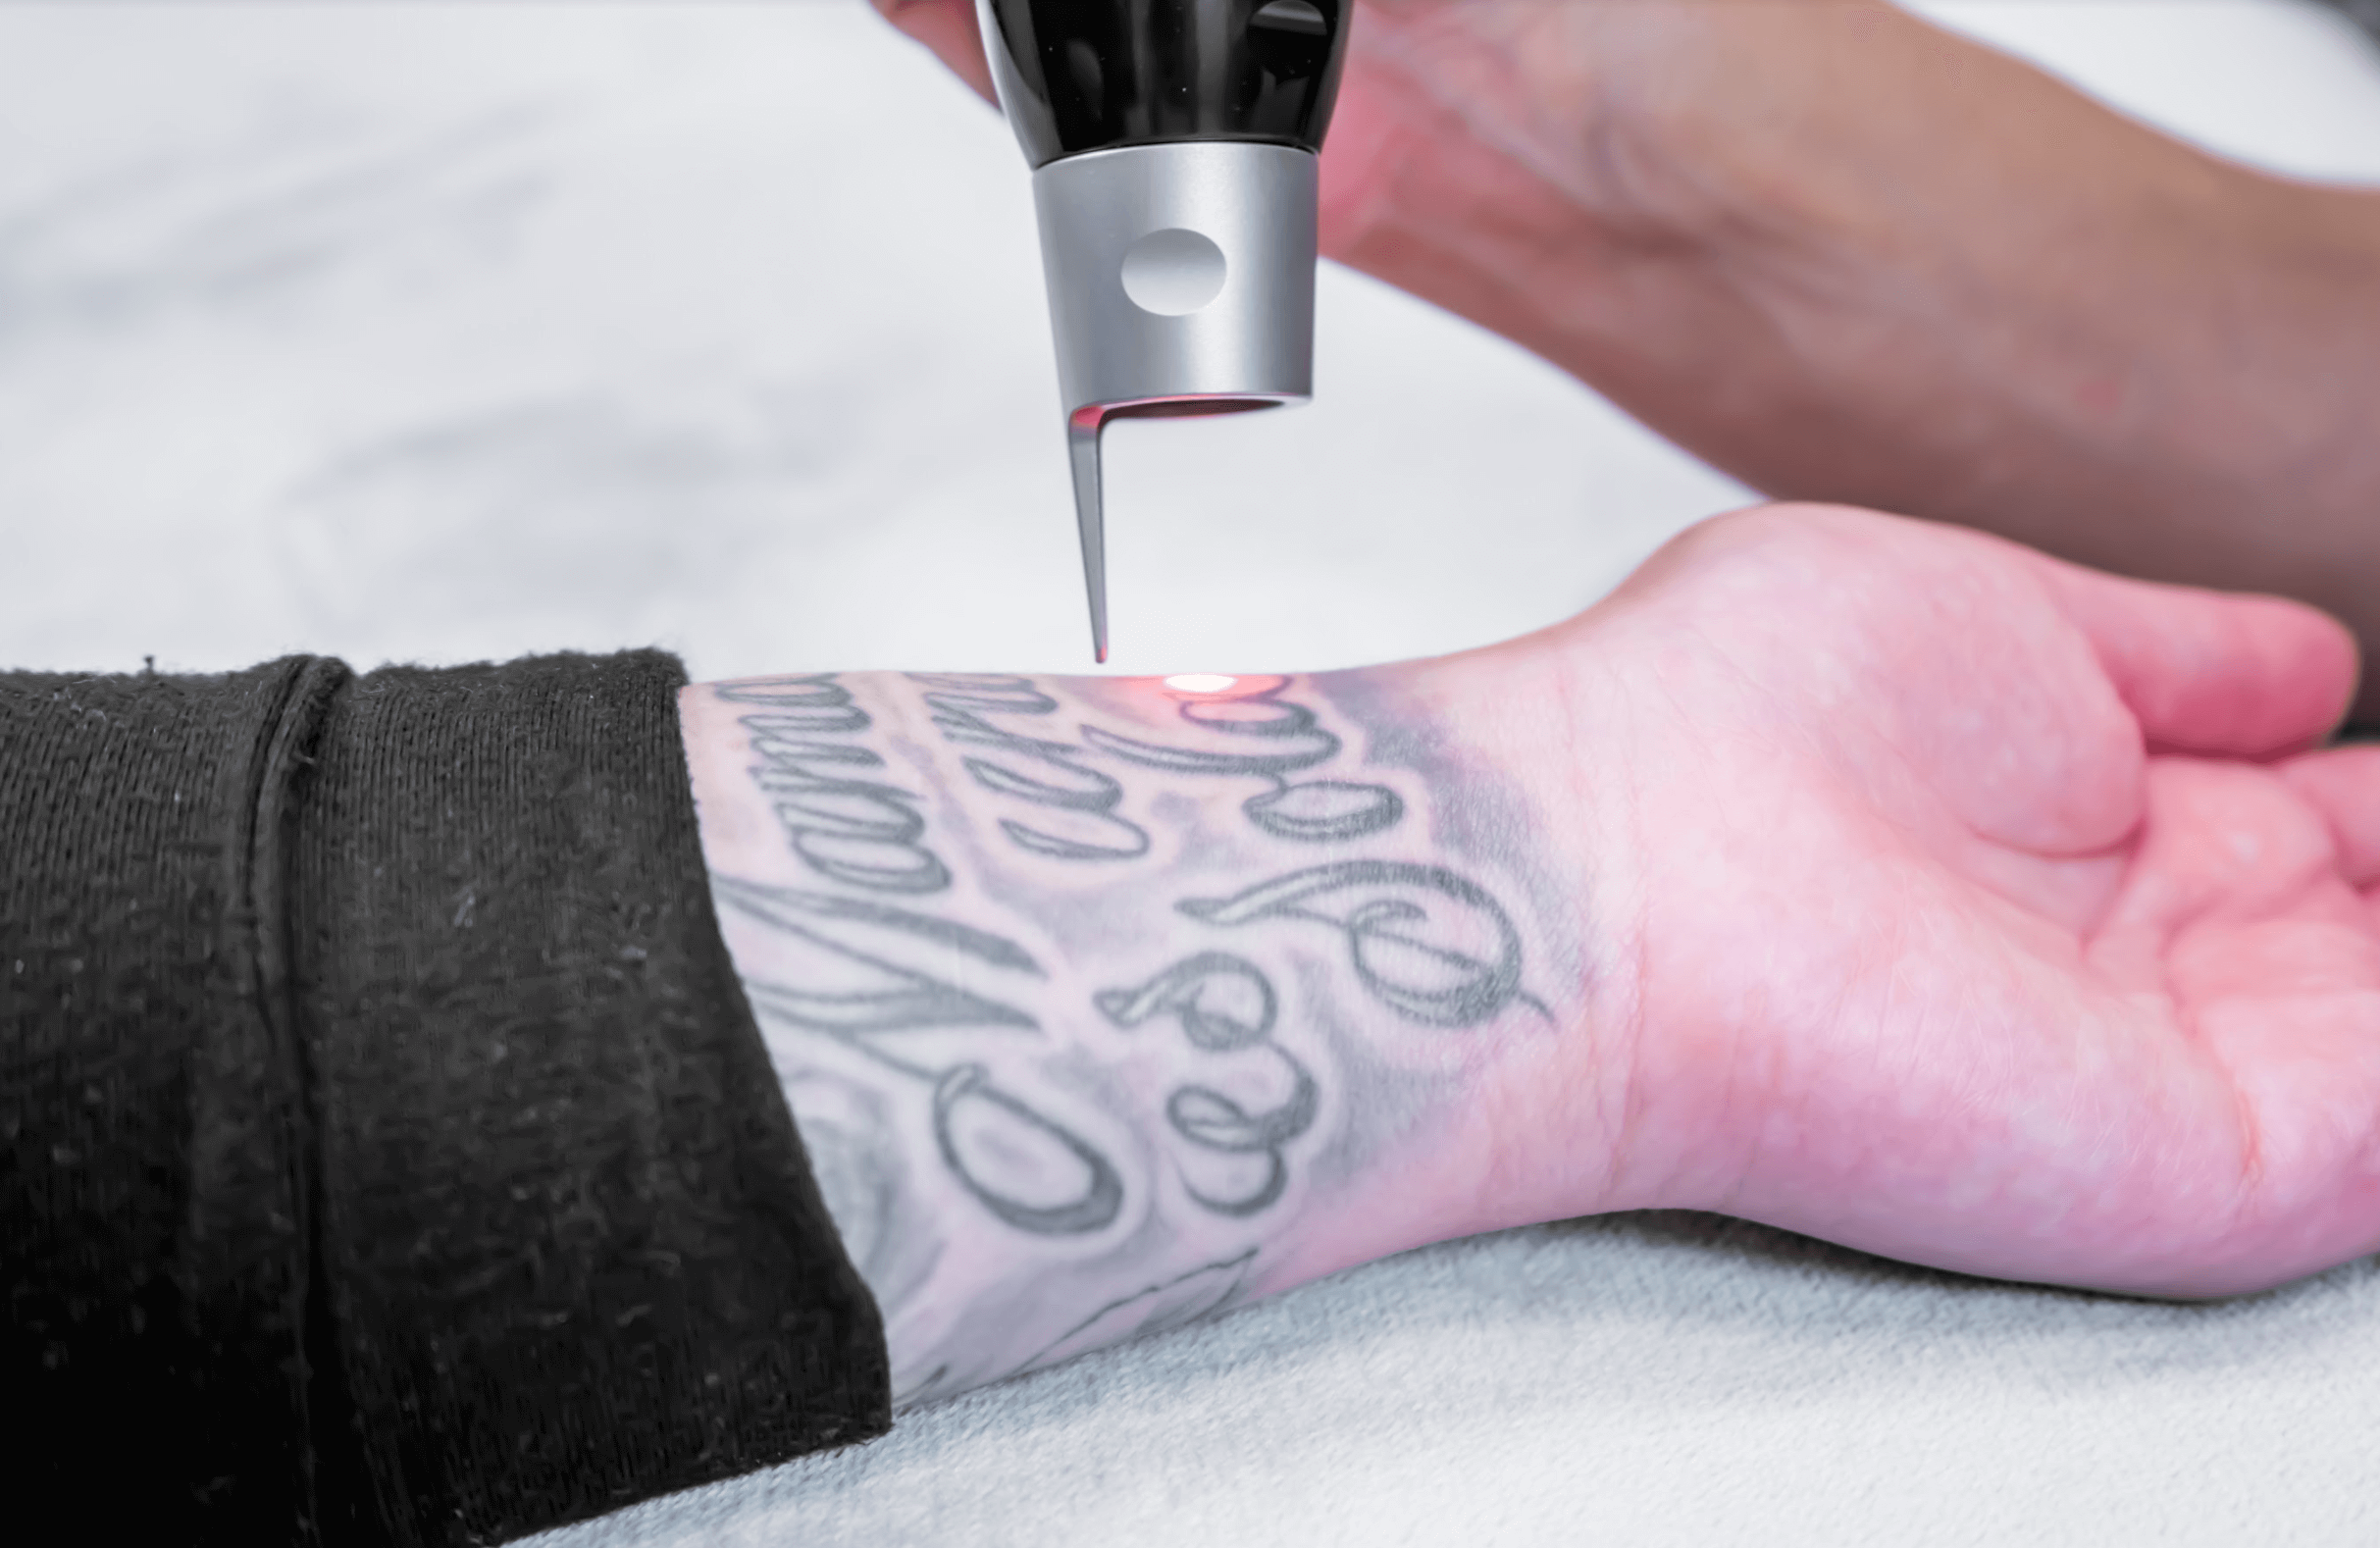 Timing Your Transformation: Laser Removal and Choosing Your Machine